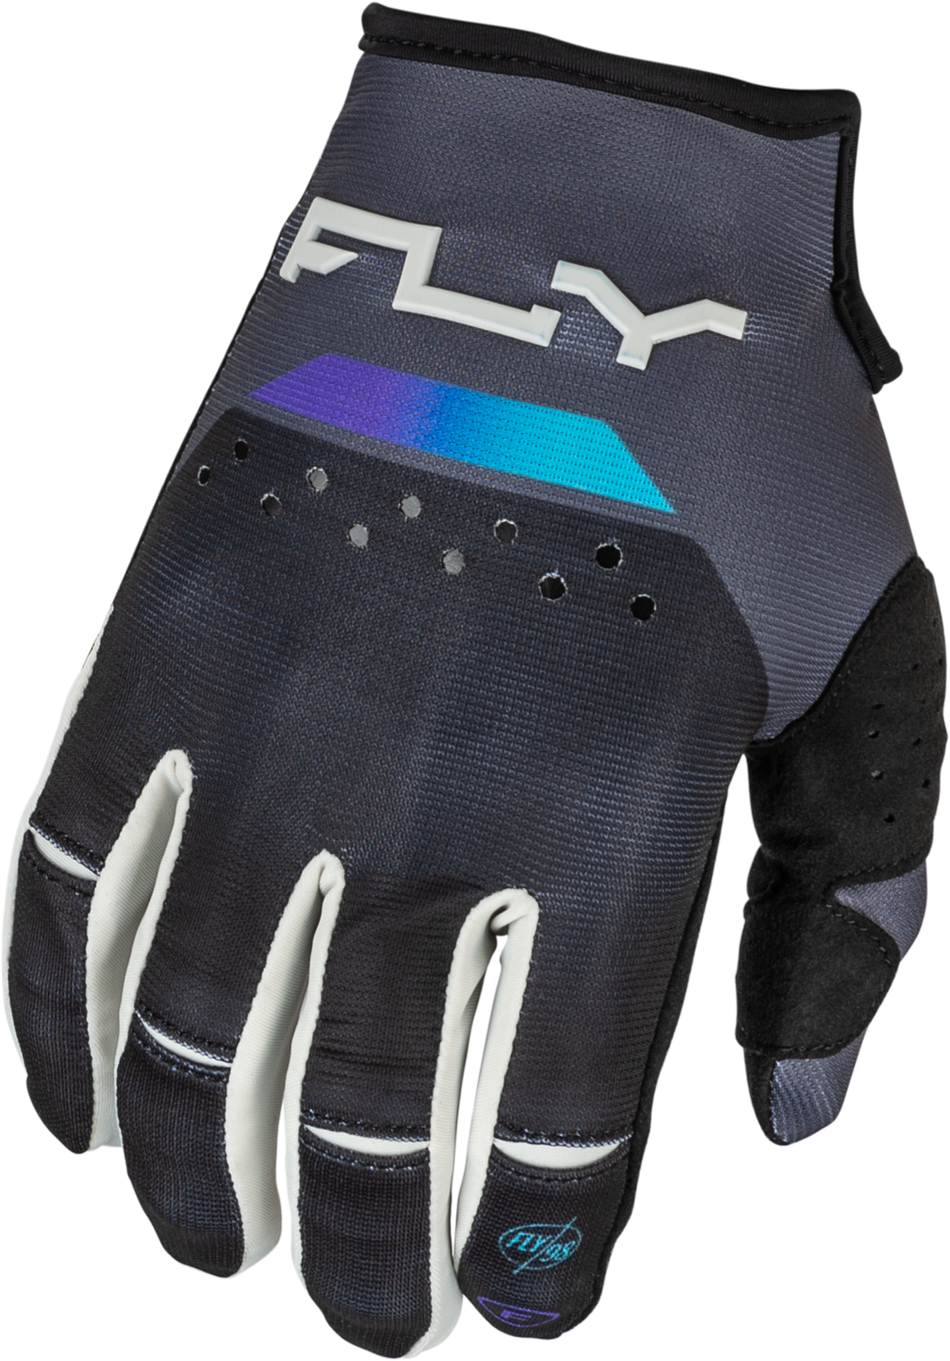 FLY RACING Kinetic Reload Gloves Charcoal/Black/Blue Iridium Sm 377-510S